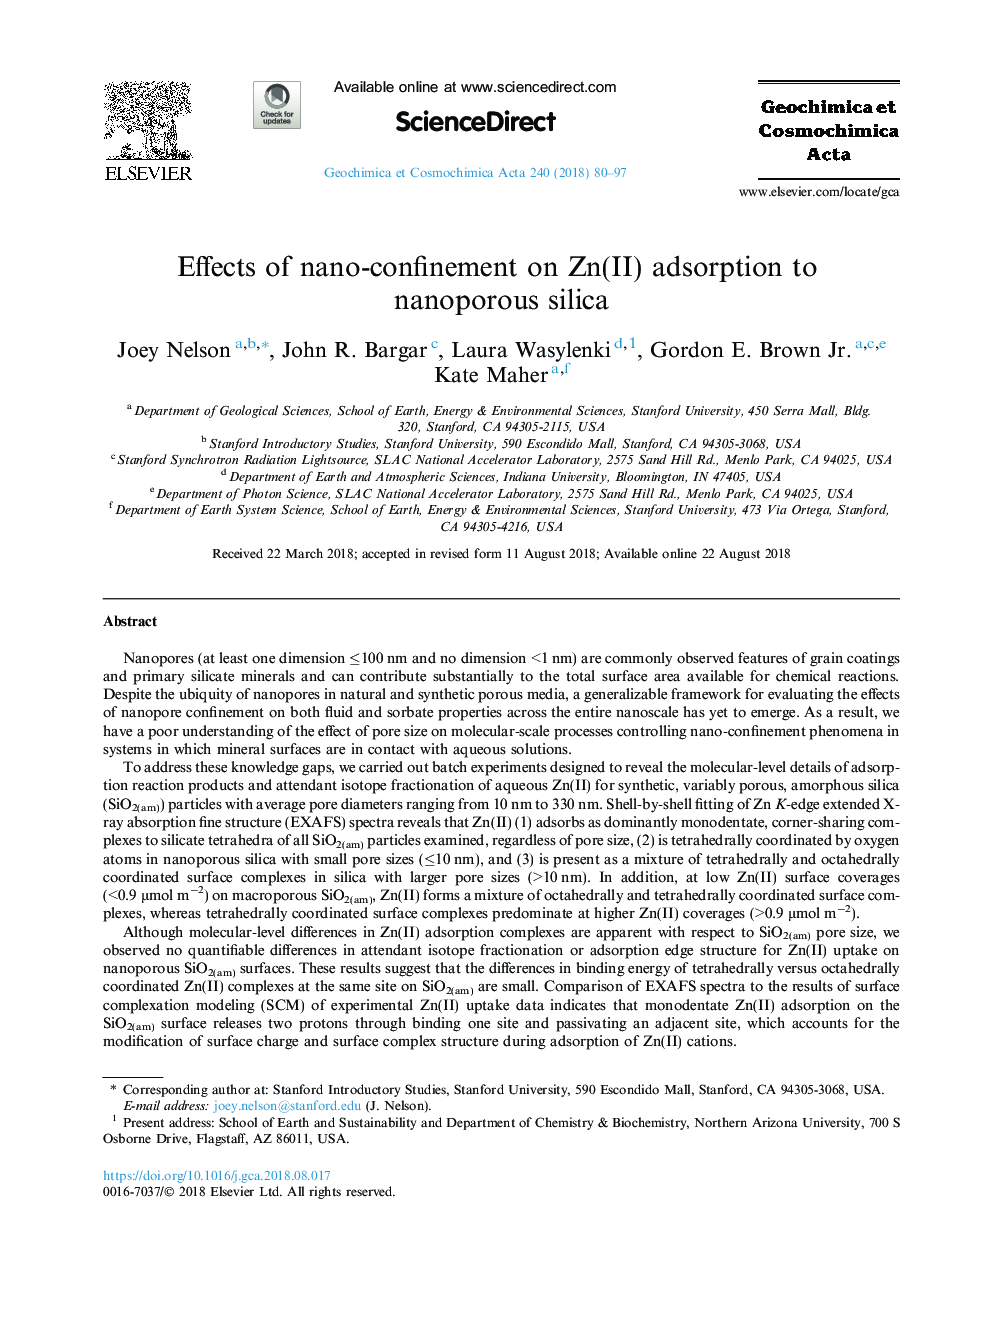 Effects of nano-confinement on Zn(II) adsorption to nanoporous silica